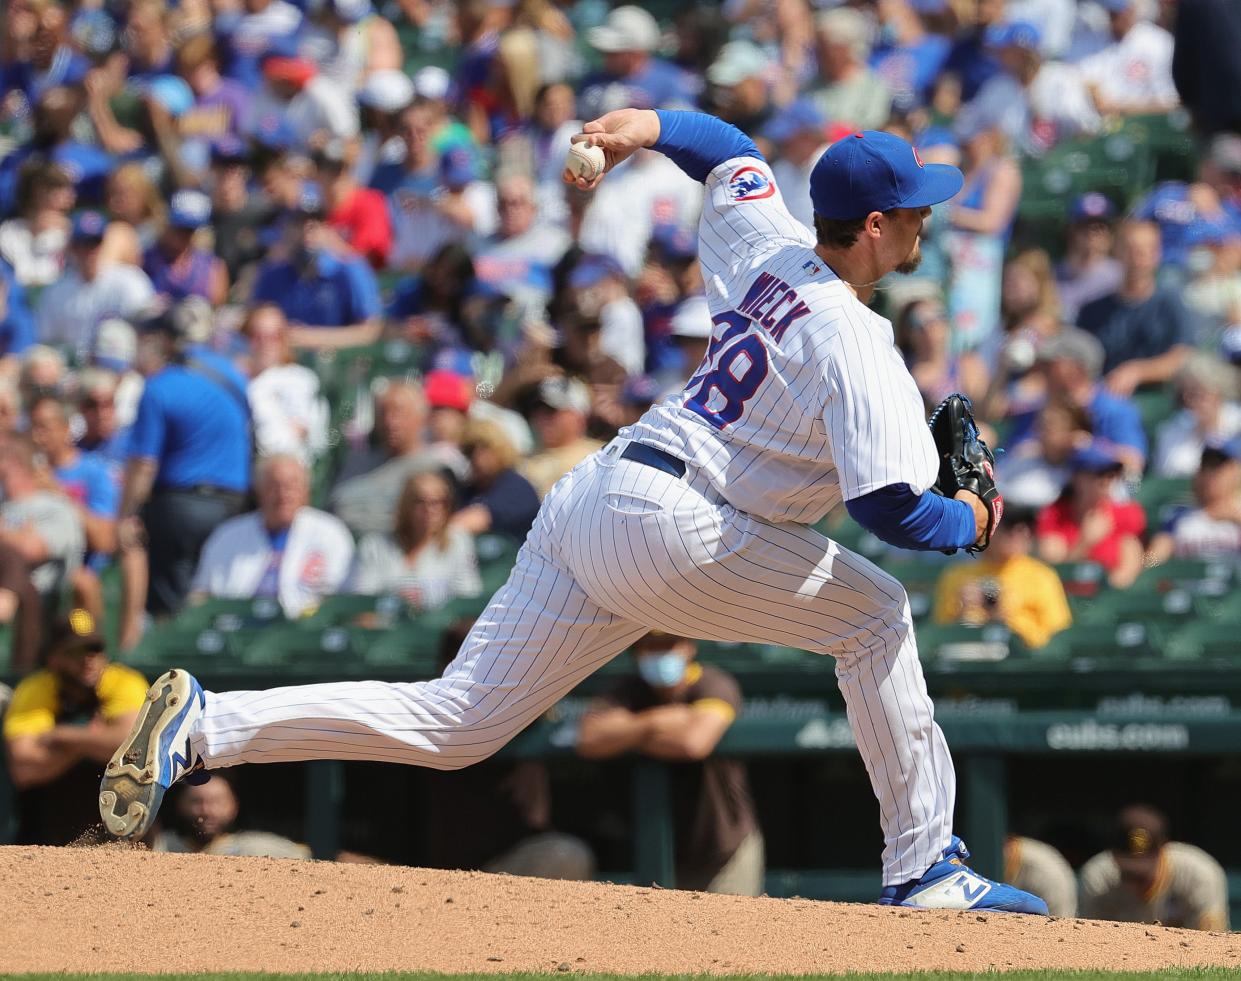 Brad Wieck of the Chicago Cubs pitches against the San Diego Padres at Wrigley Field in Chicago on June 2, 2021.